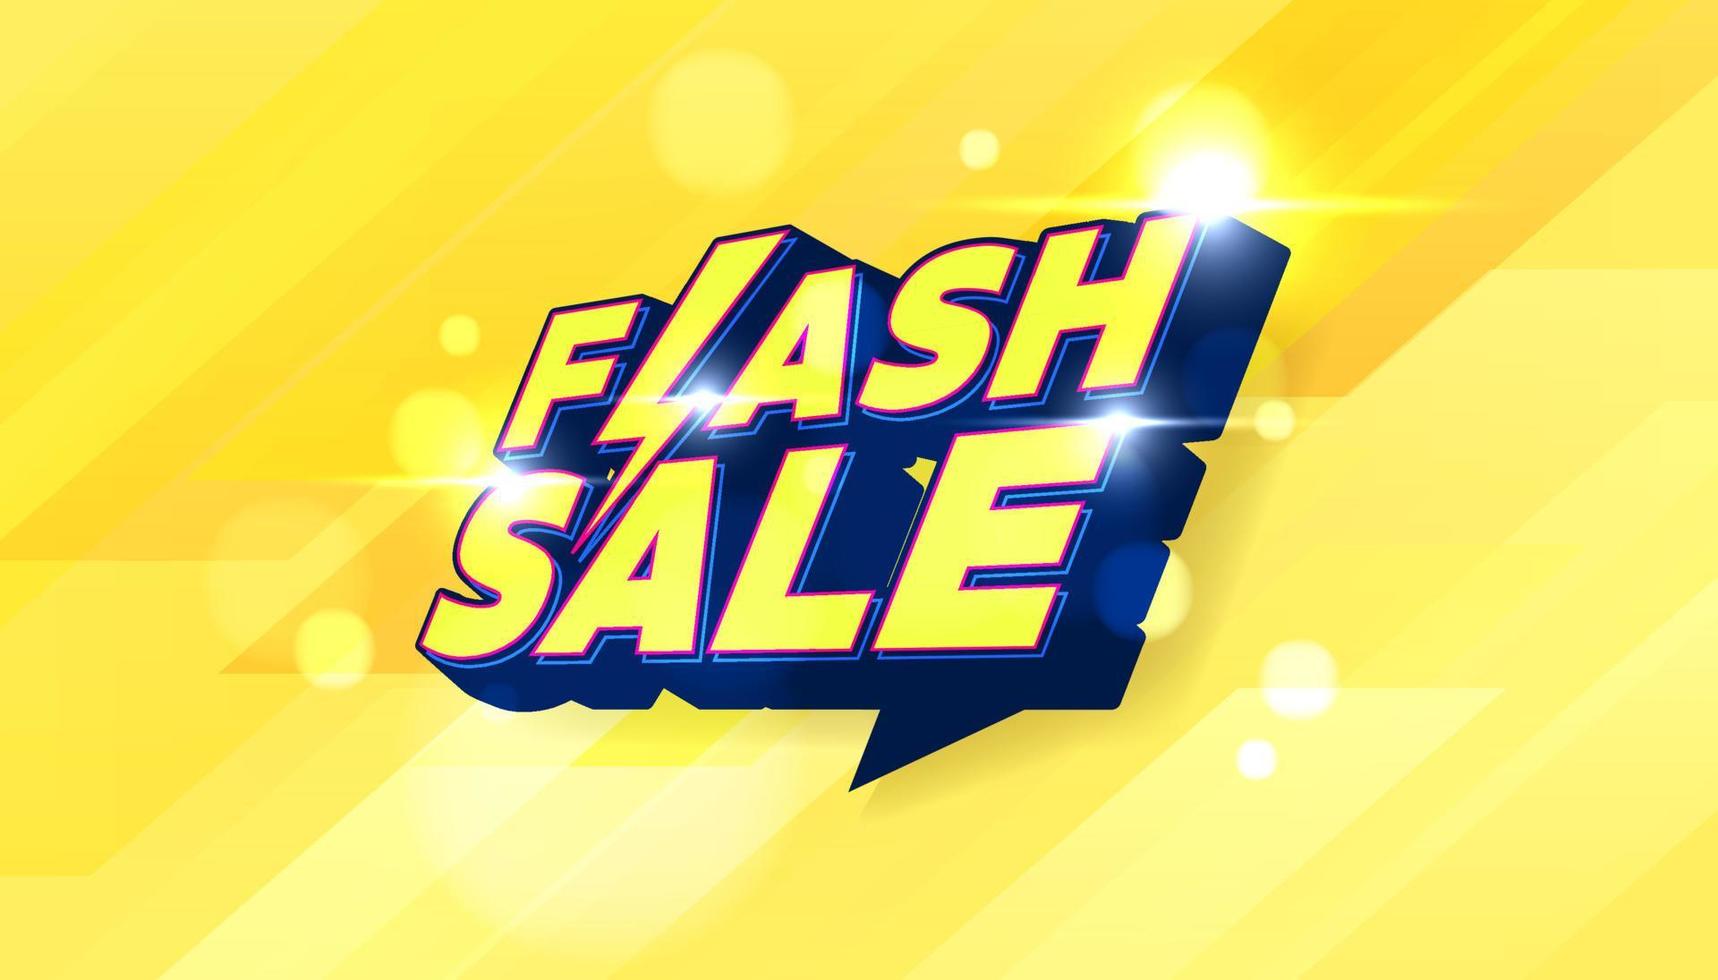 Flash Sale Shopping banner on yellow background. Flash Sale banner template design for social media and website. Special offer Flash Sale campaign or promotion. vector